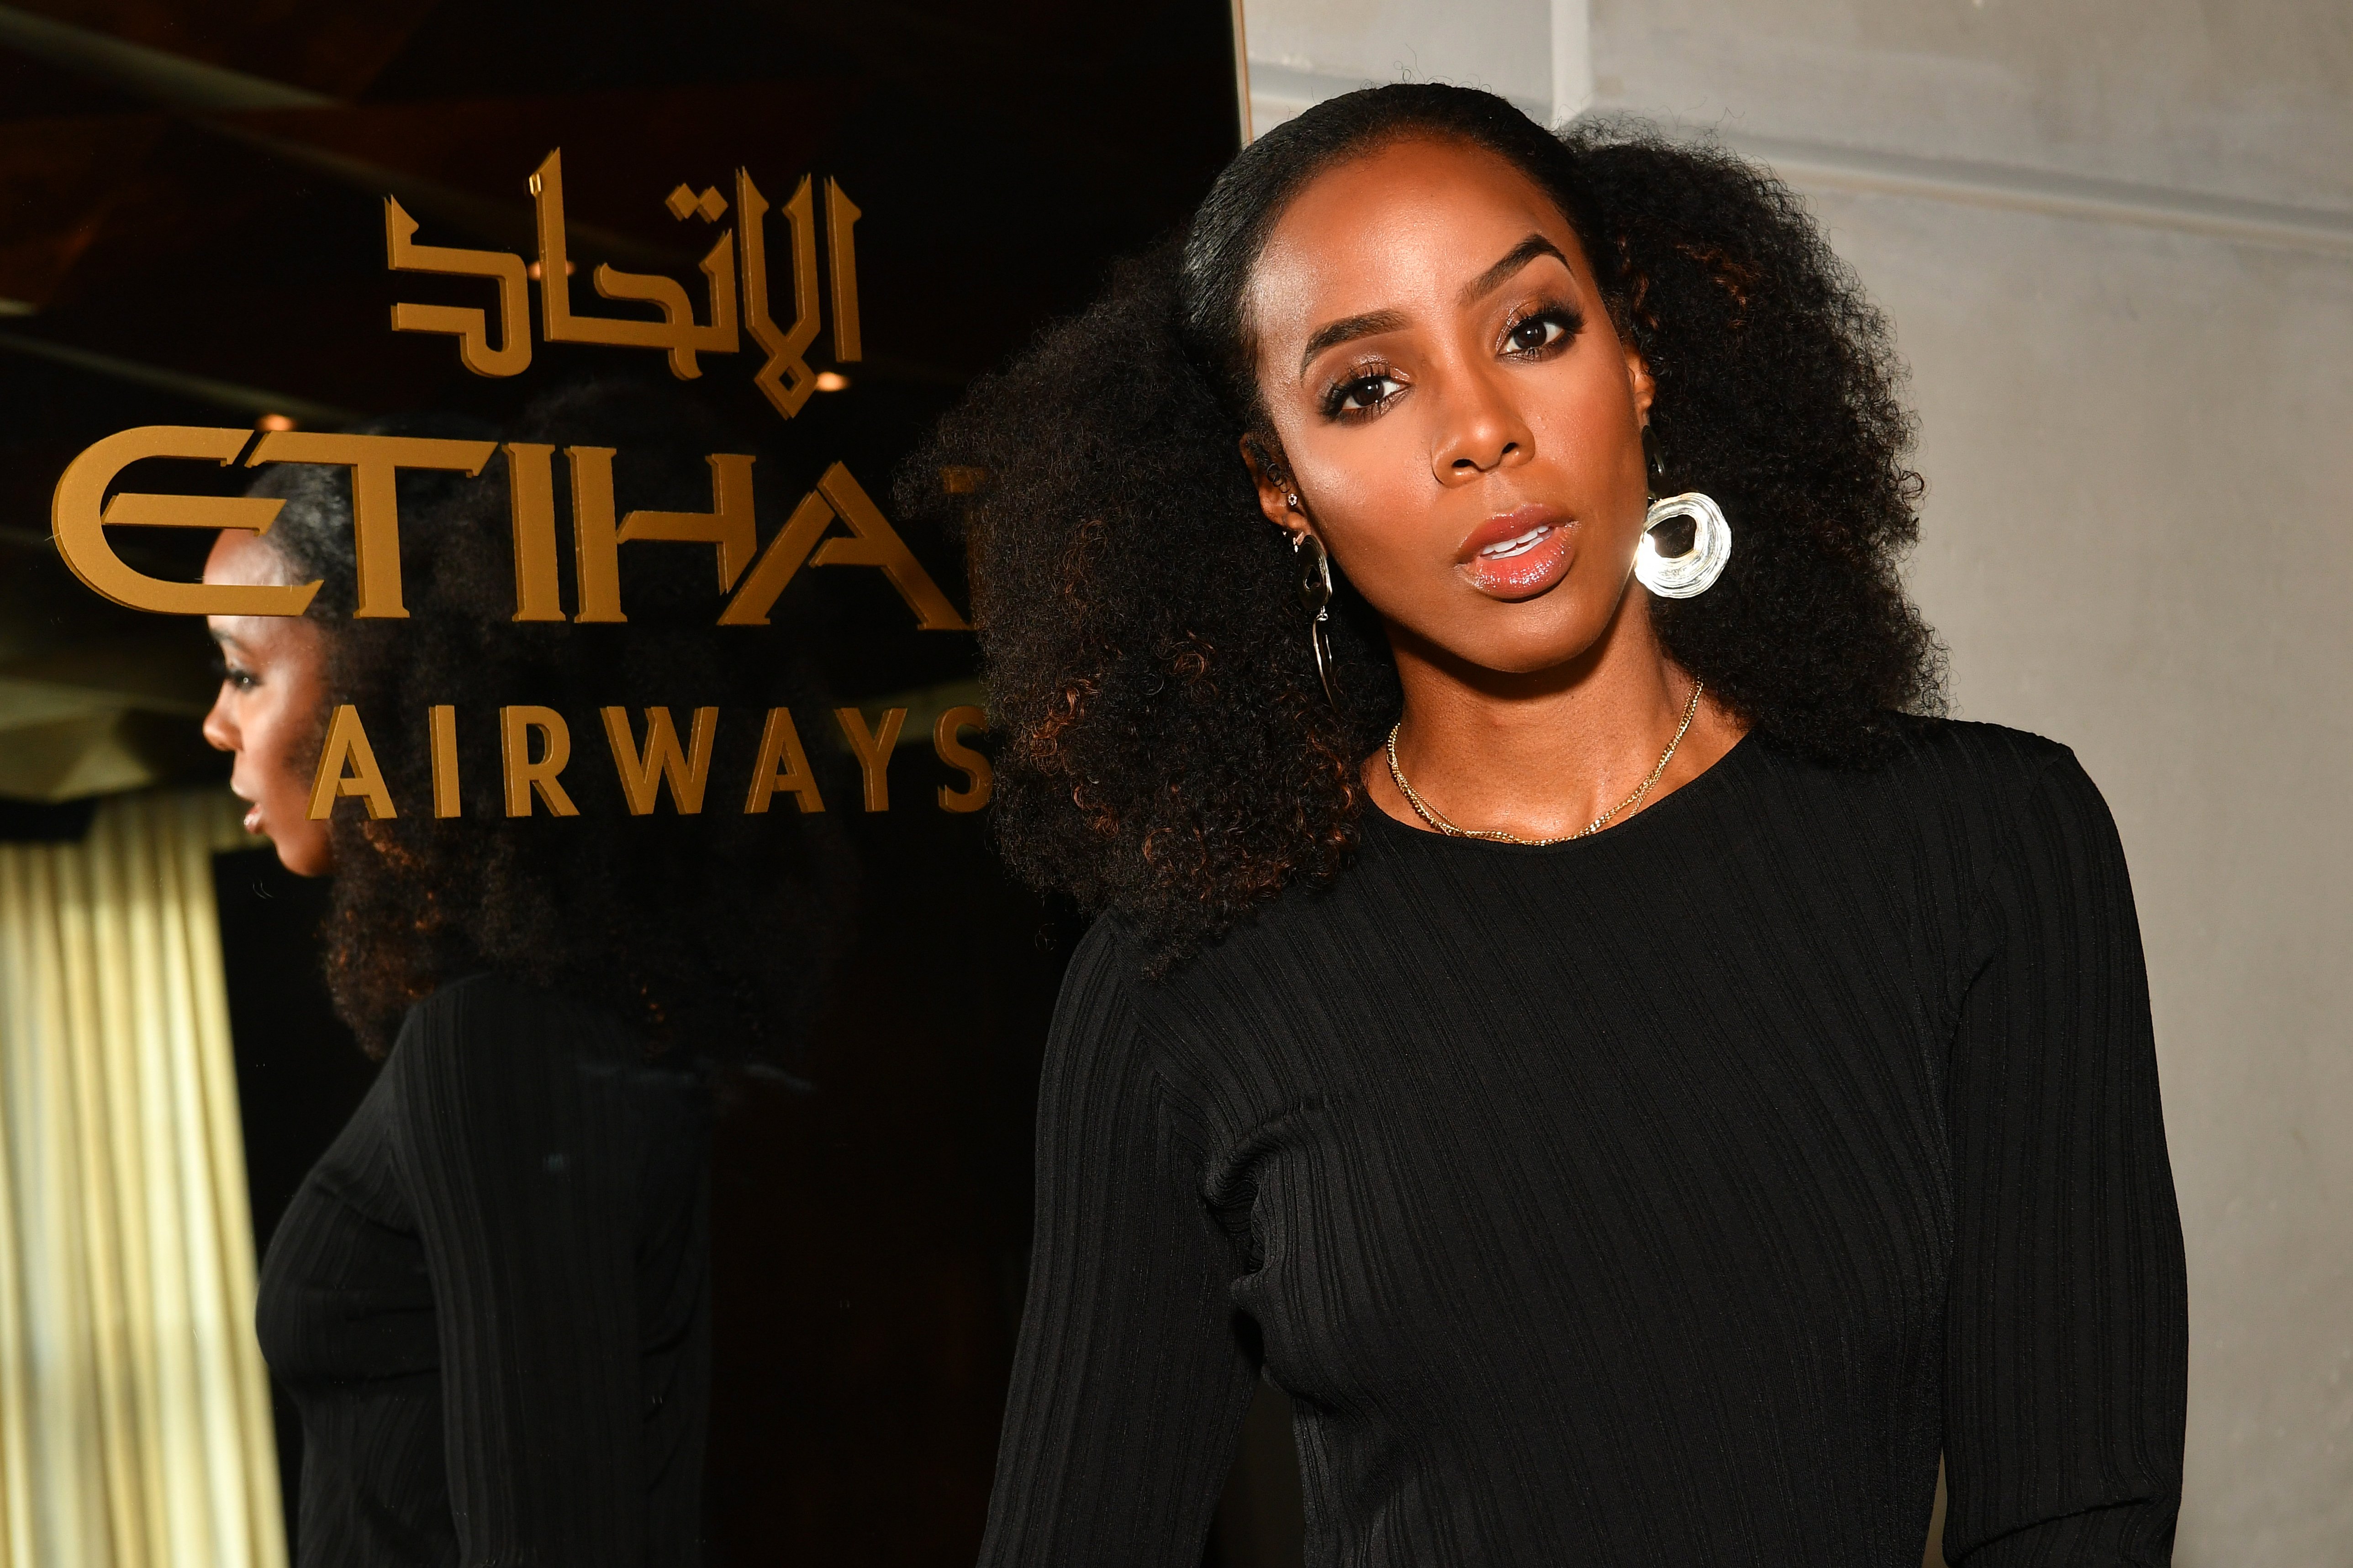 Kelly Rowland in the Etihad Airways VIP Lounge at NYFW at Spring Studios on February 14, 2018 in New York City.|Source: Getty Images